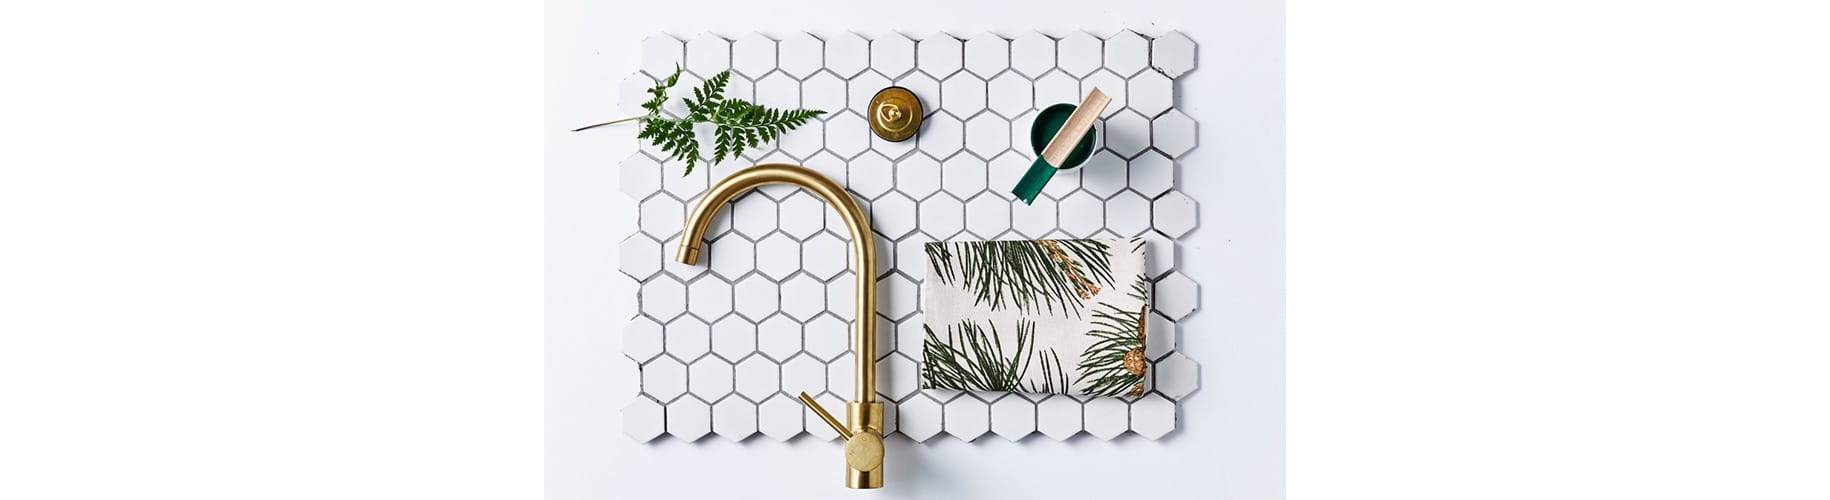 flat lay photography of a gold faucet and fern